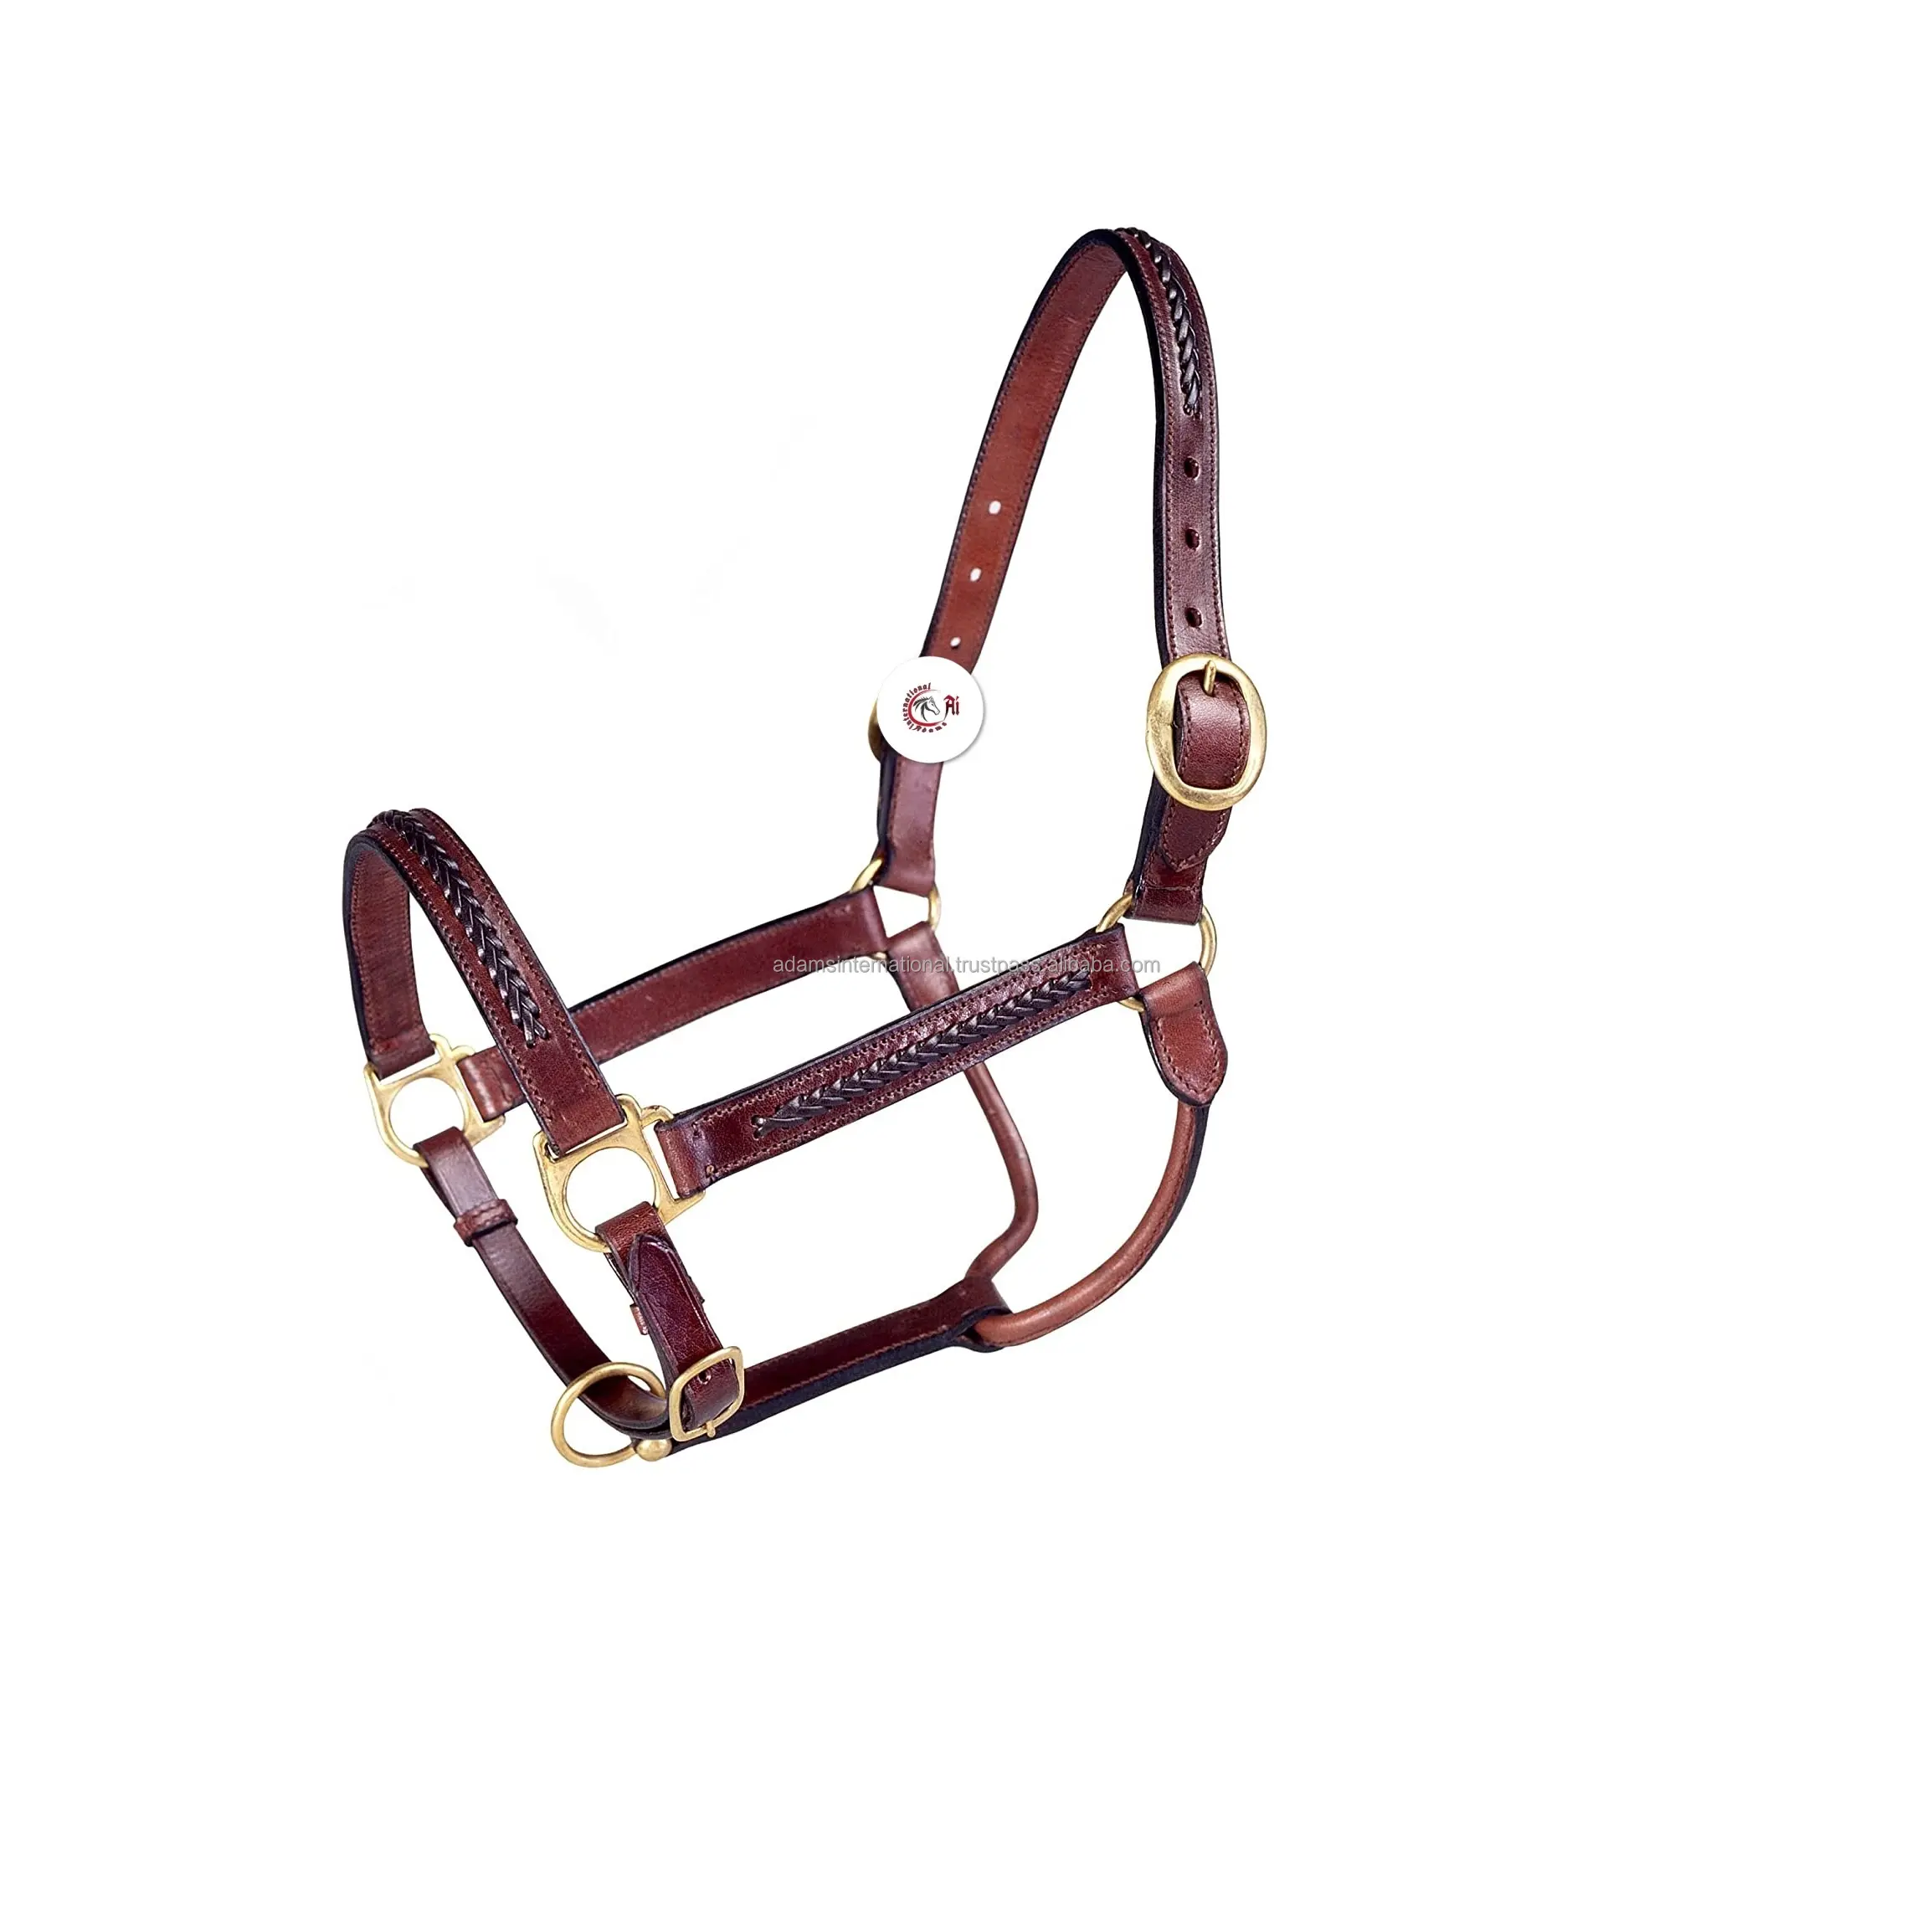 Leather Halter for Horses of Superb Quality With A Comfortable Headpiece